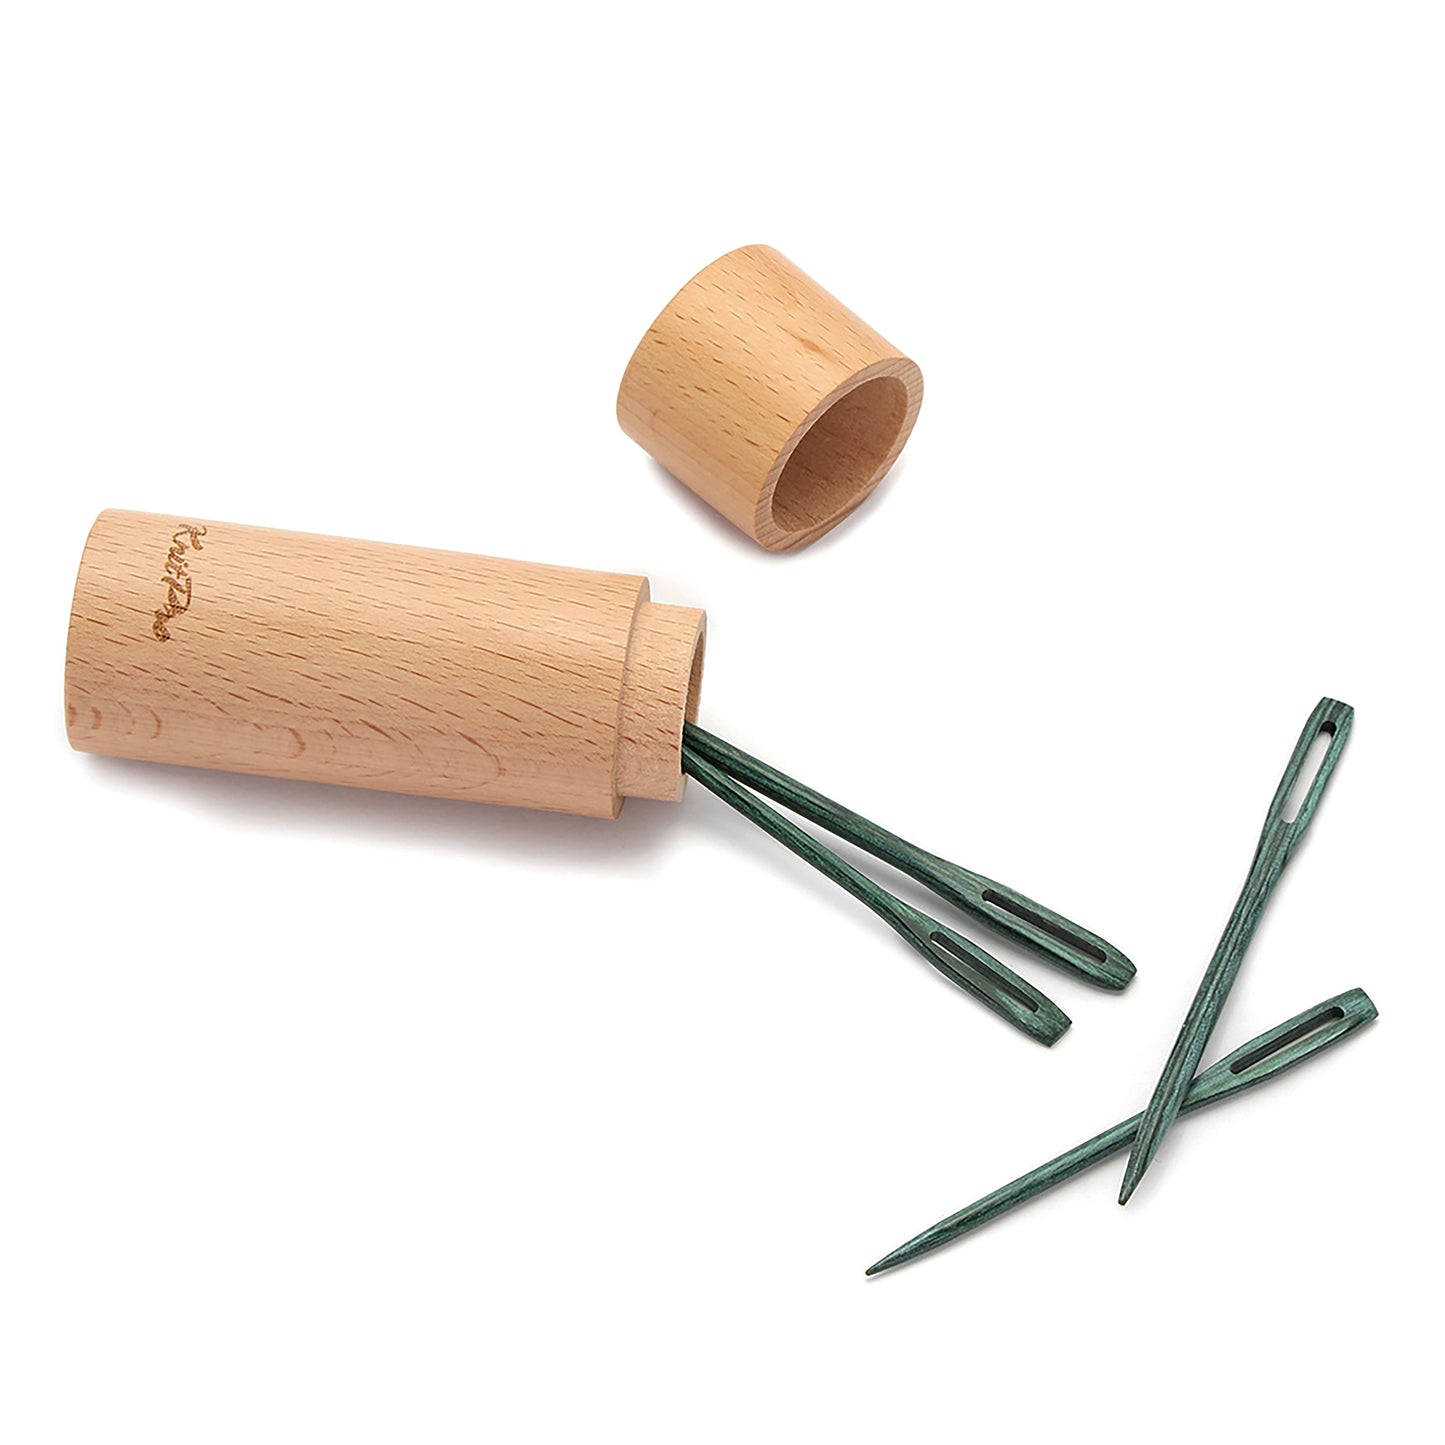 KnitPro The Mindful Collection - Darning Needles